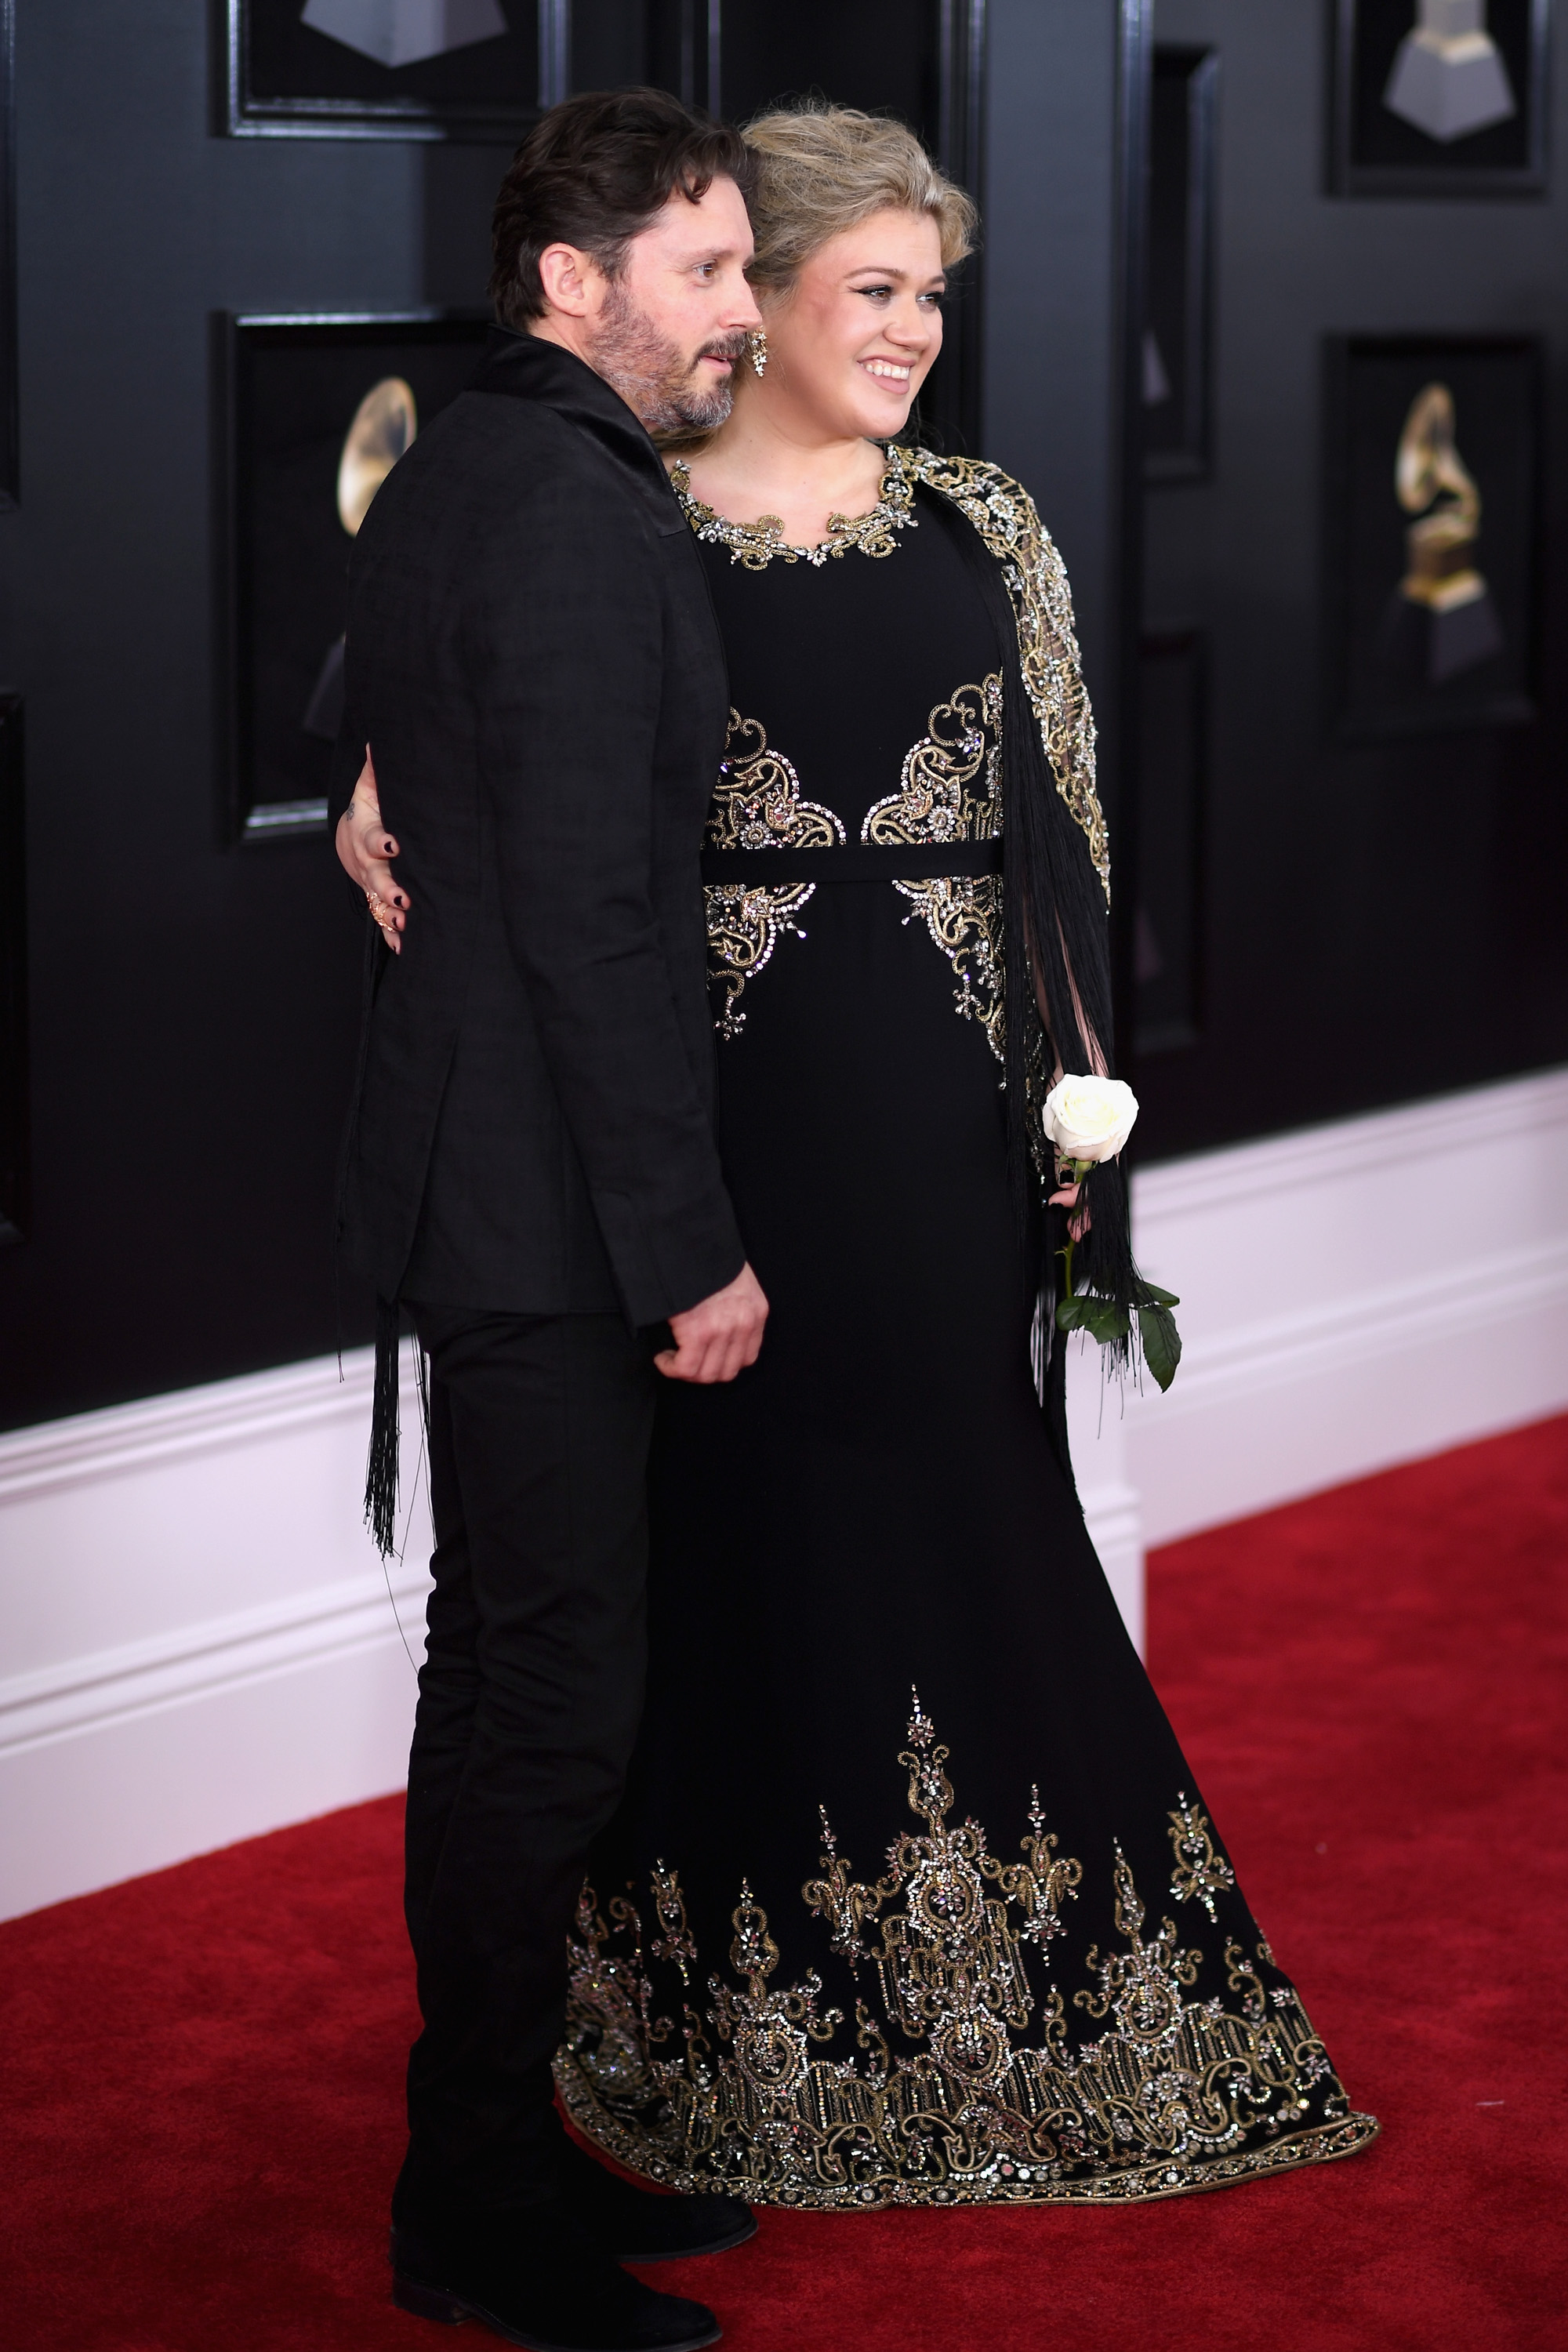 Kelly Clarkson and Brandon Blackstock during the 60th Annual GRAMMY Awards at Madison Square Garden on January 28, 2018, in New York City. | Source: Getty Images